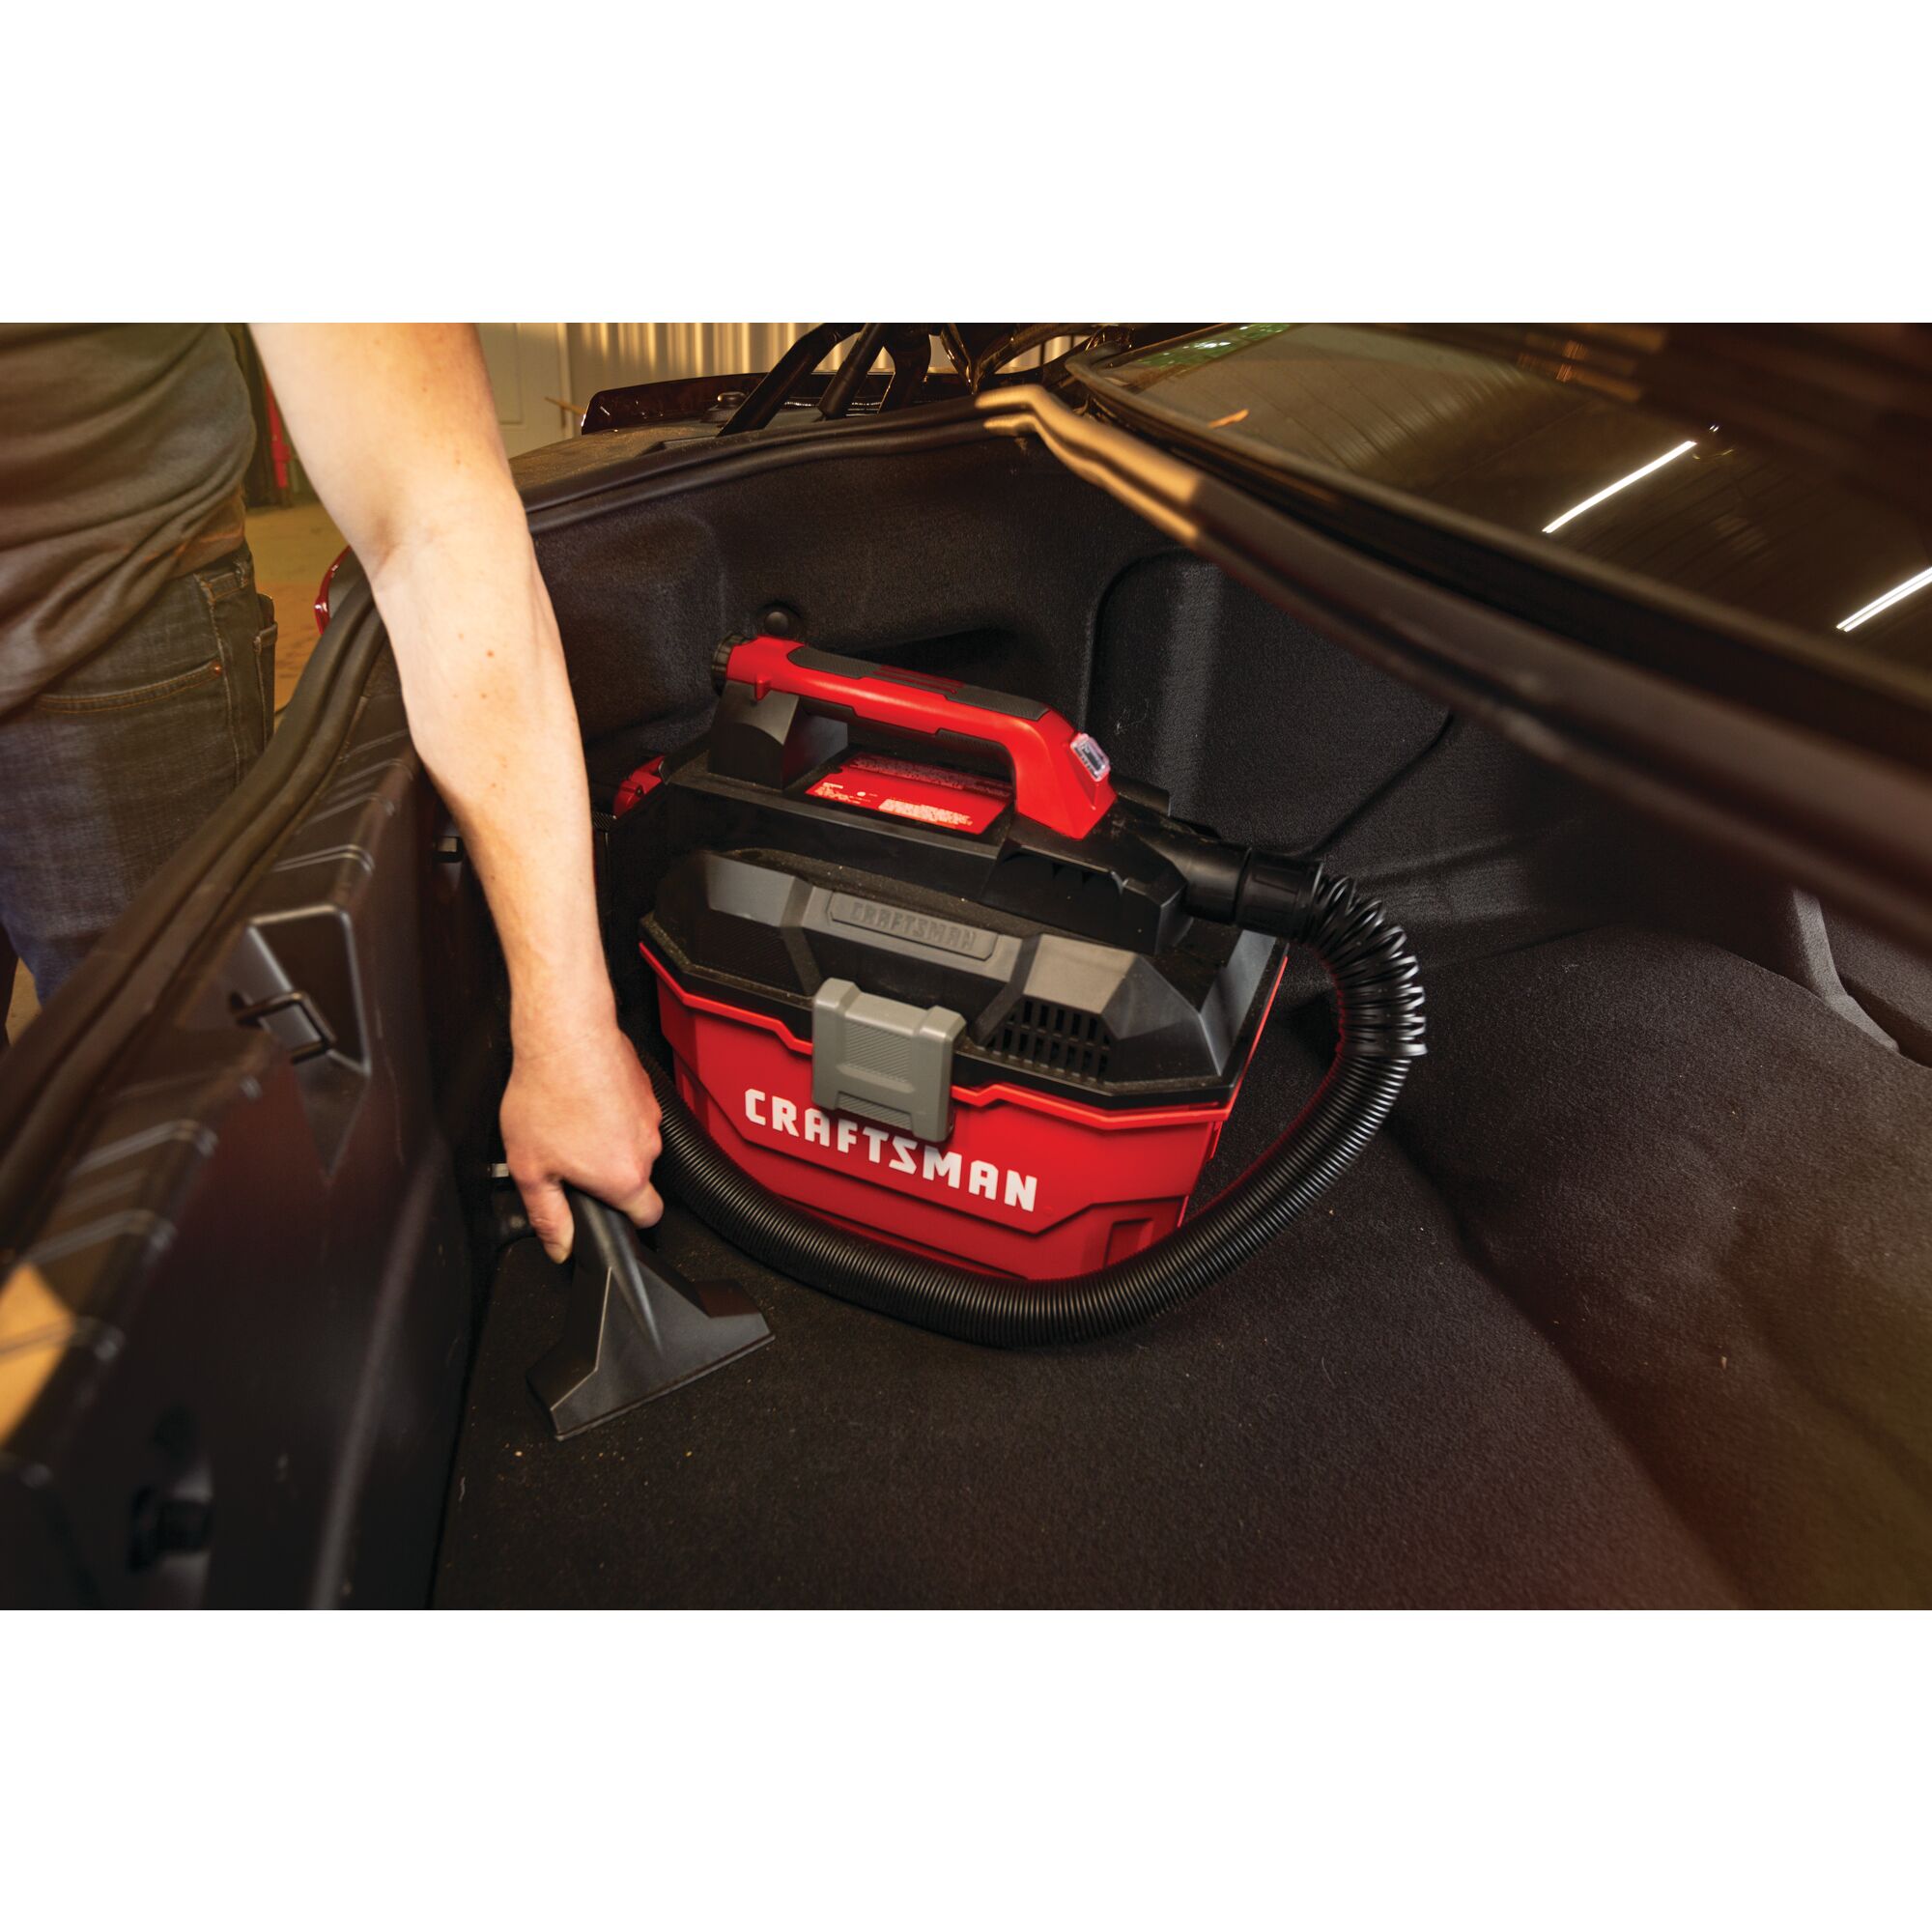 20 volt cordless 2 gallon wet dry vacuum being used by a person to clean car trunk.